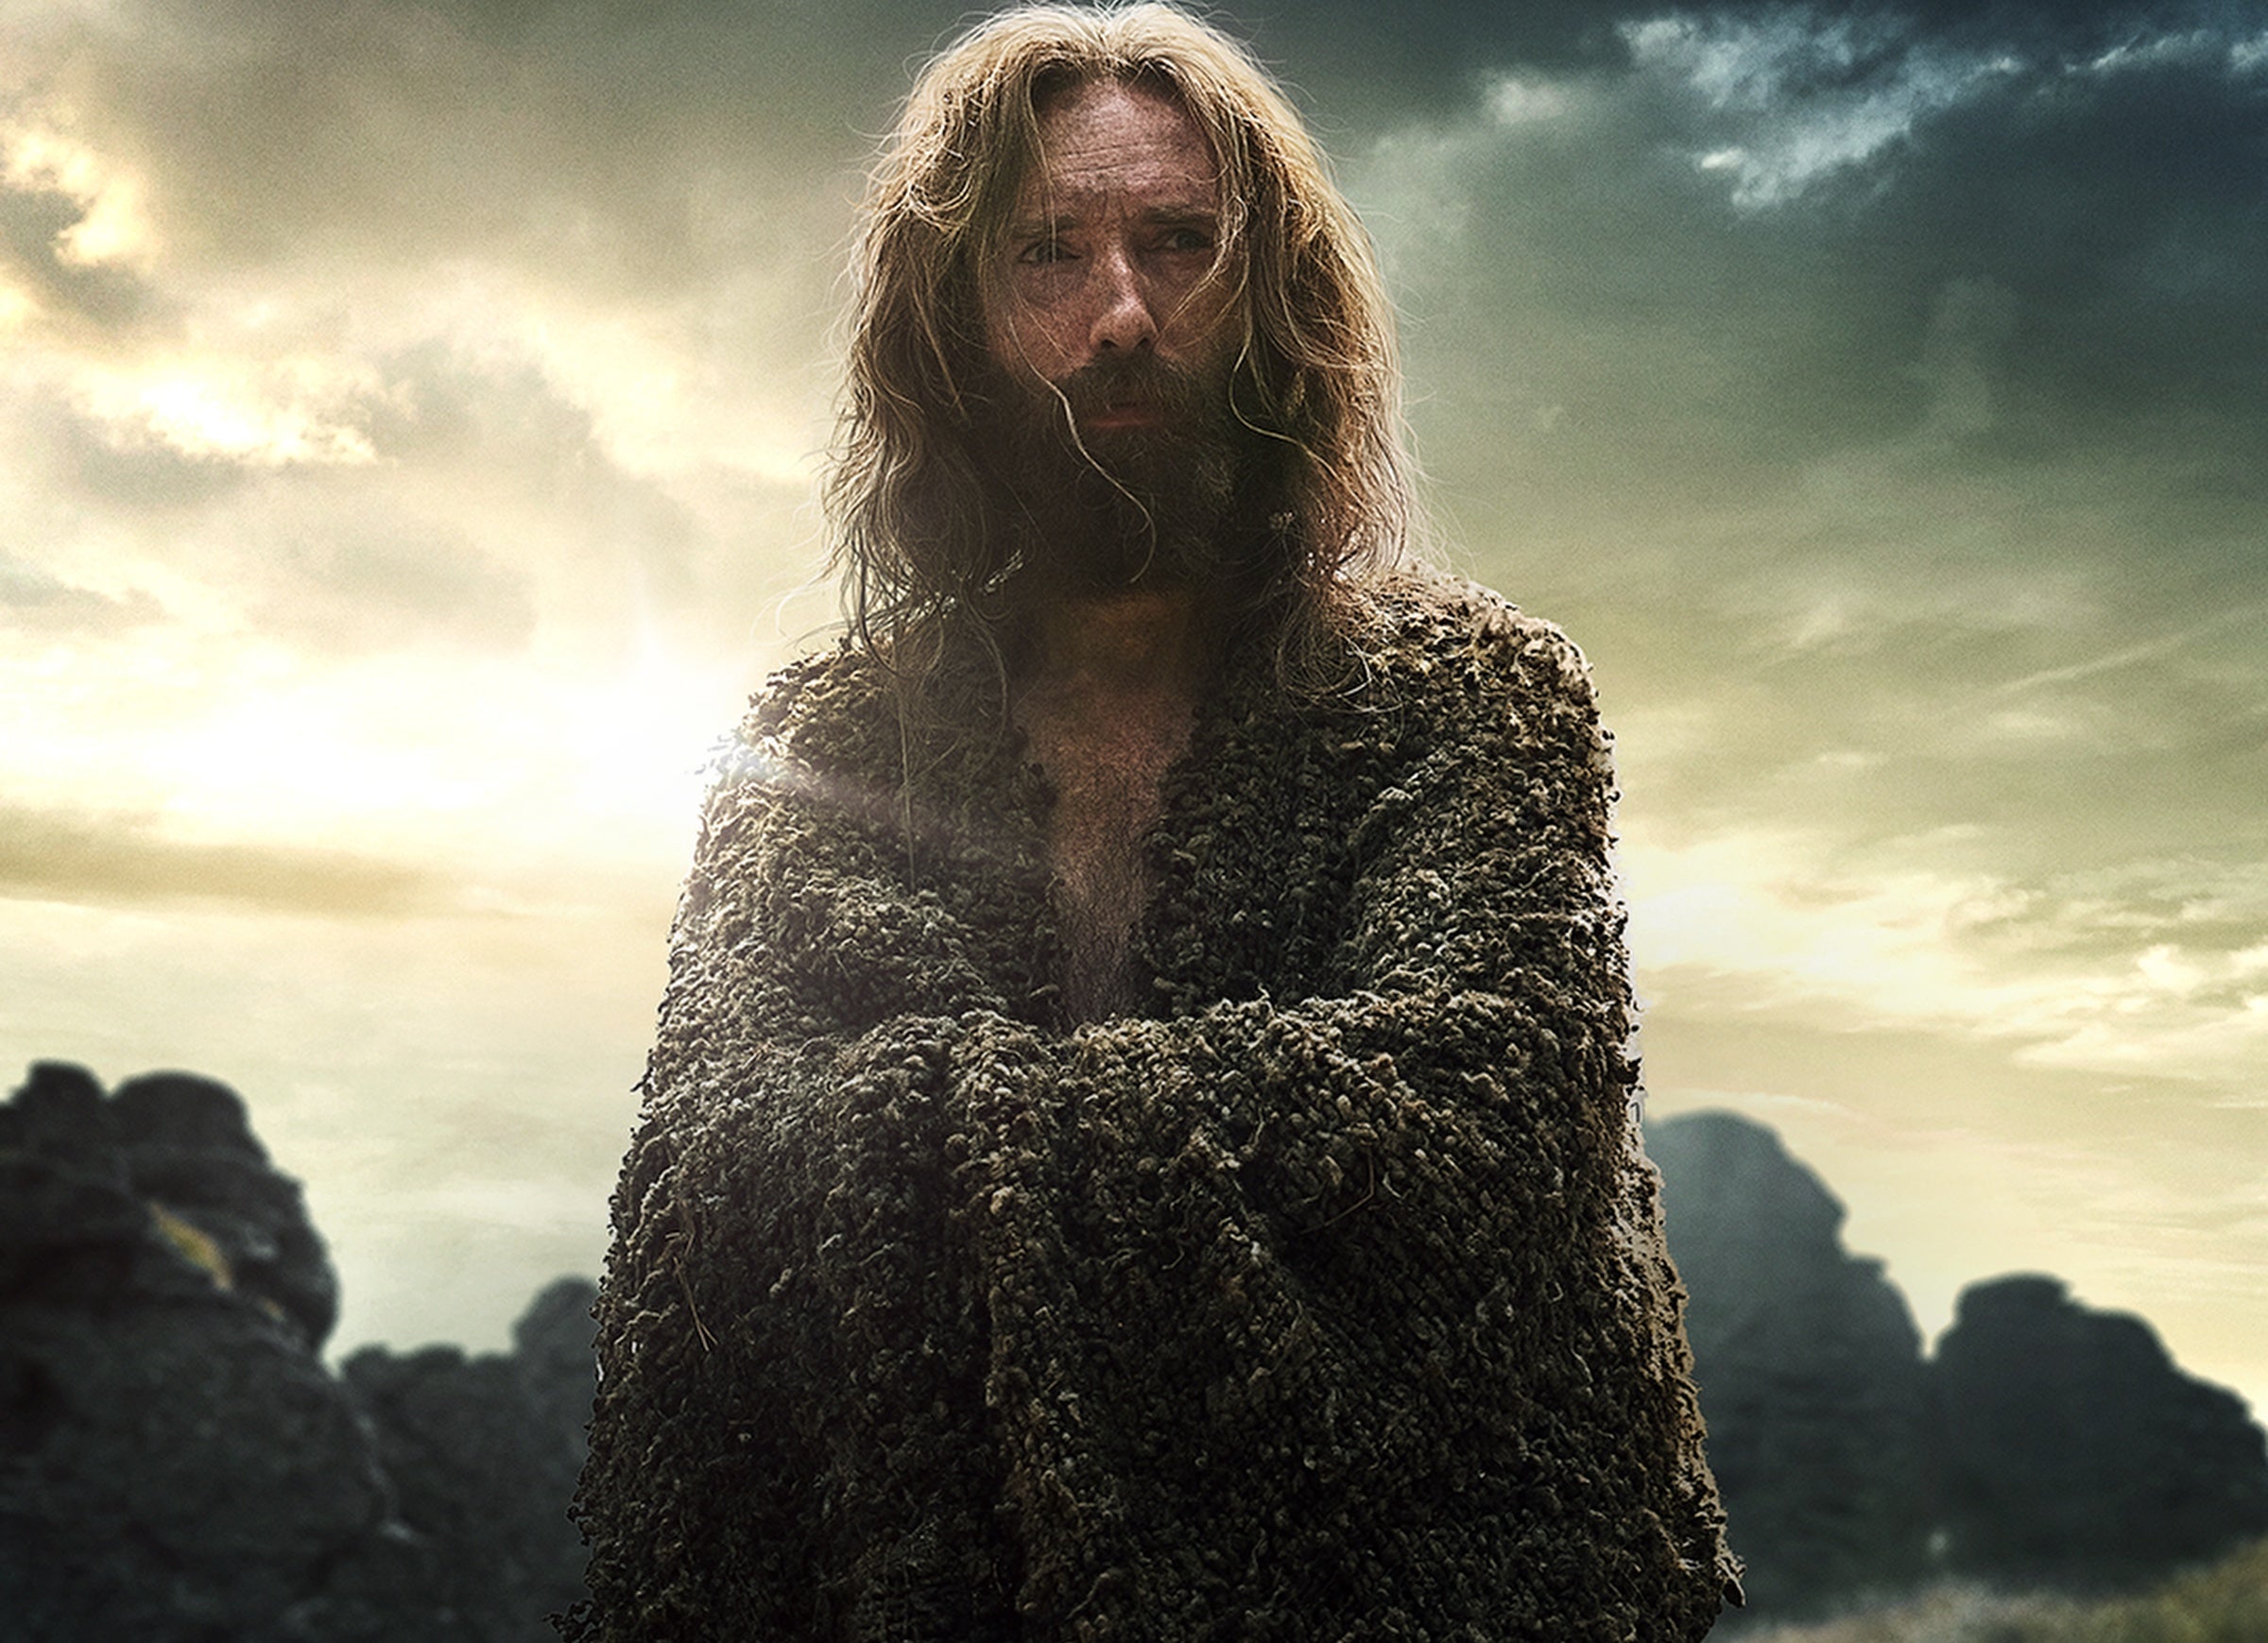 A long-haired man with a beard wrapped in a cloak stares into the distance.